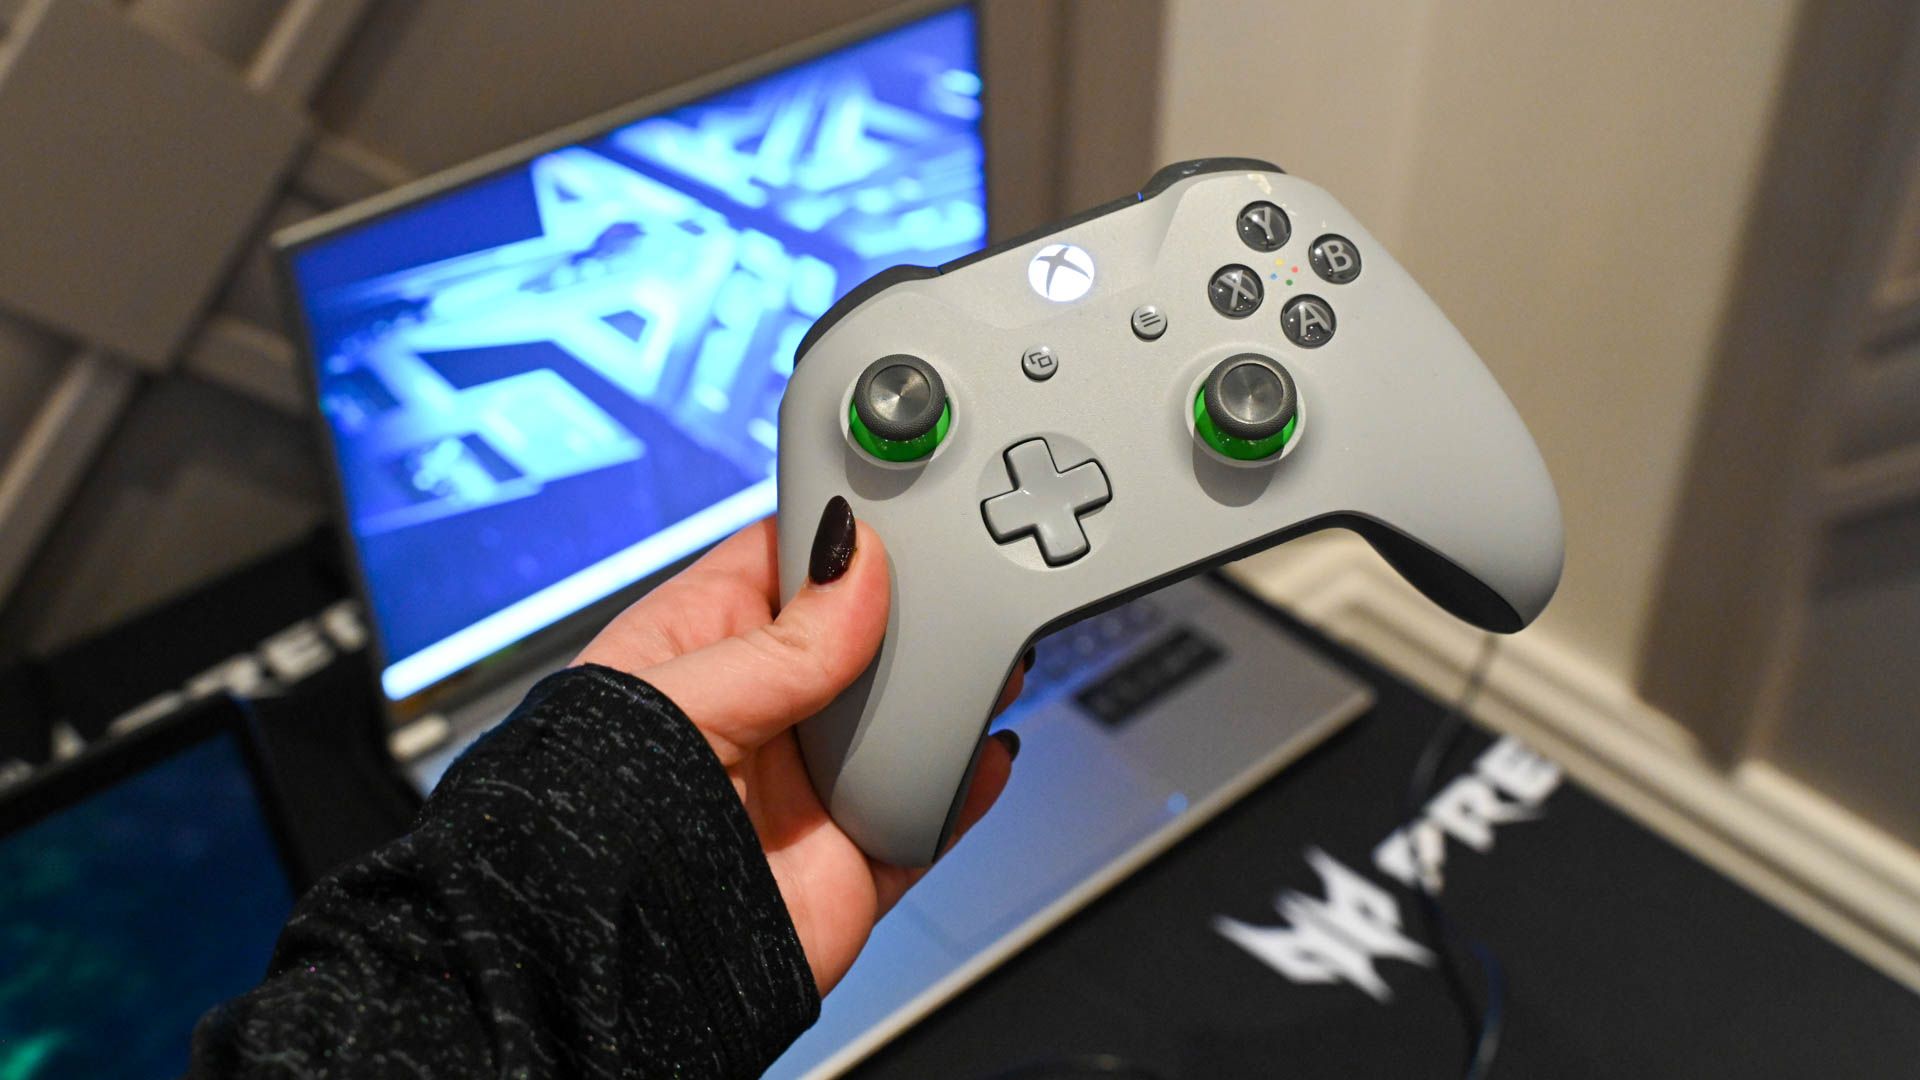 Xbox Controller being used for PC Gaming.